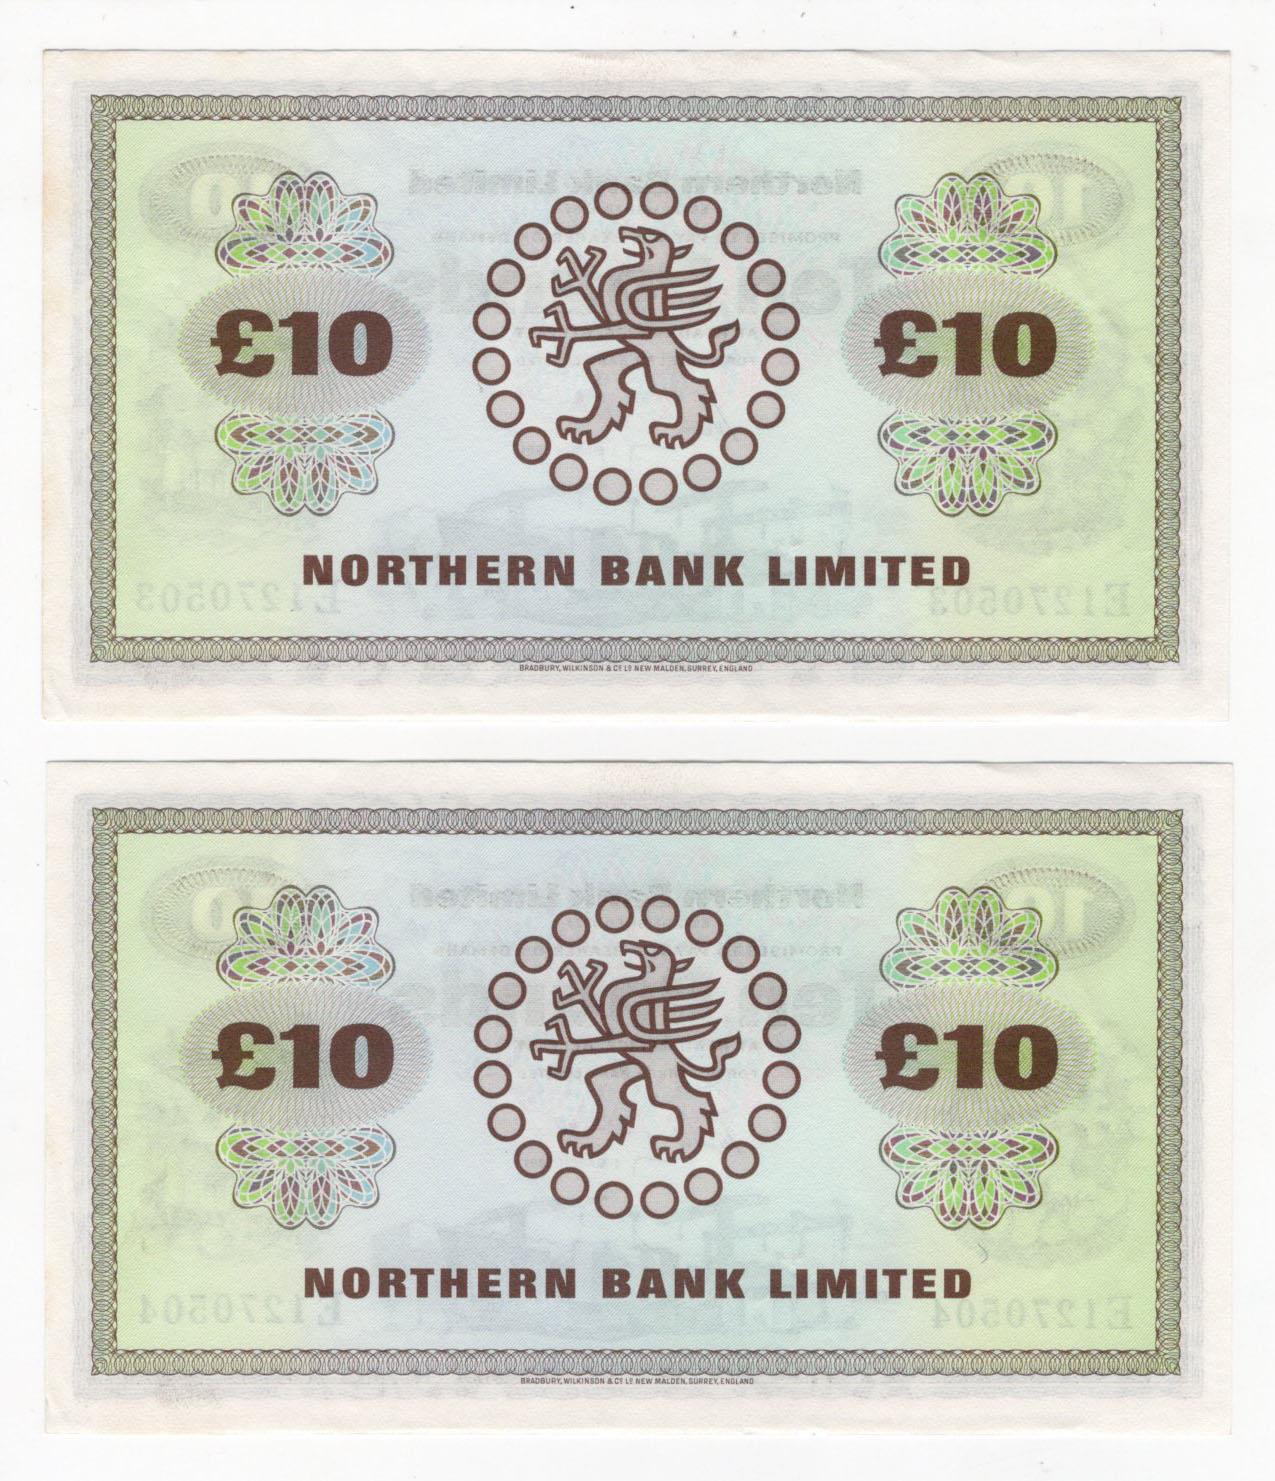 Northern Ireland, Northern Bank Limited 10 Pounds (2) dated 1st March 1981, a consecutively numbered - Image 2 of 2